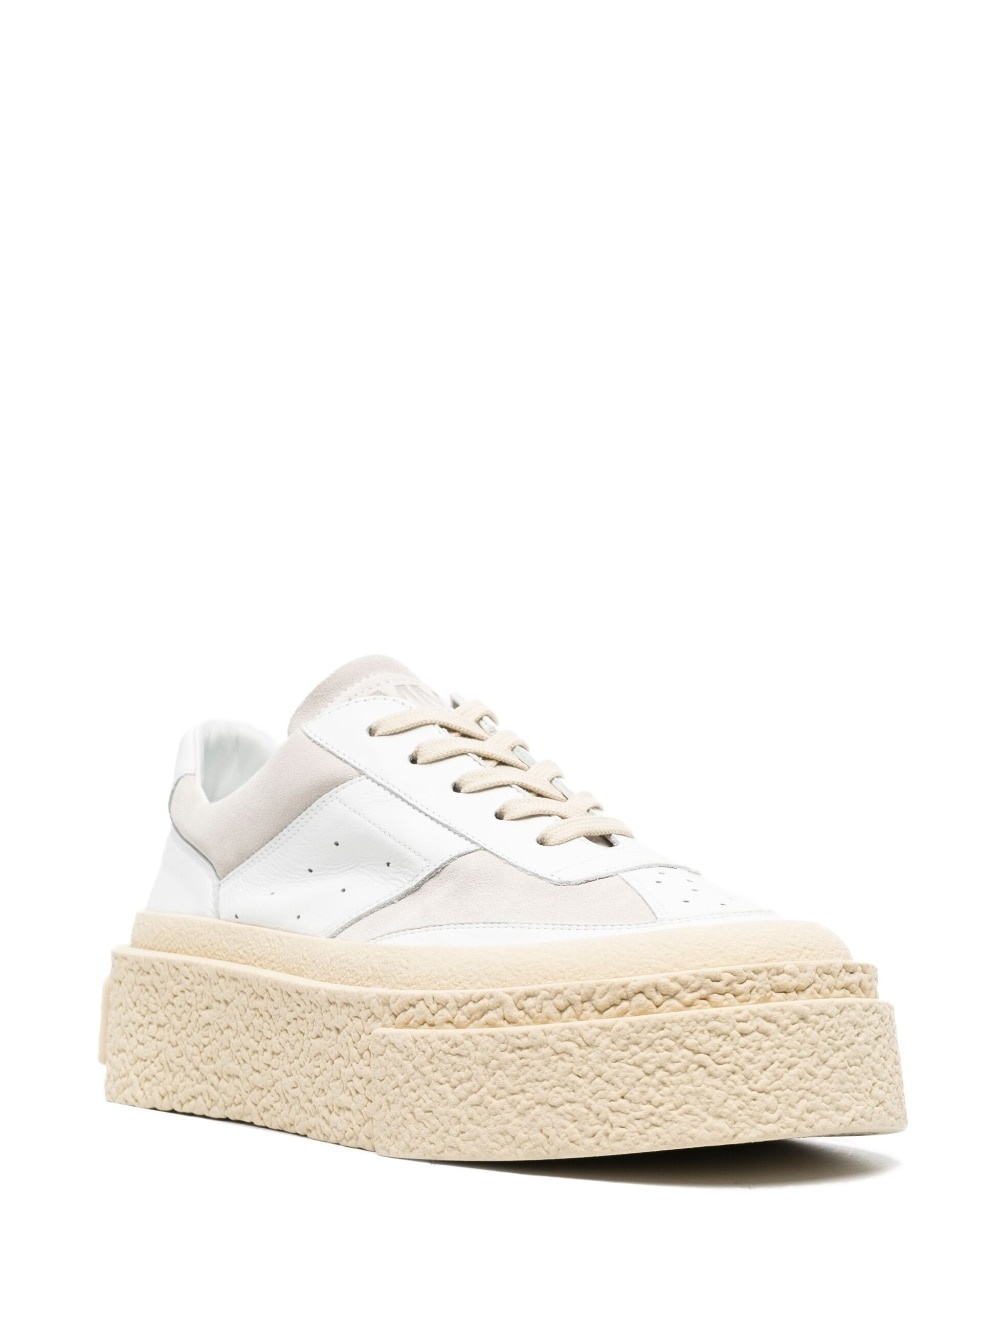 perforated-detail flatform leather sneakers - 2